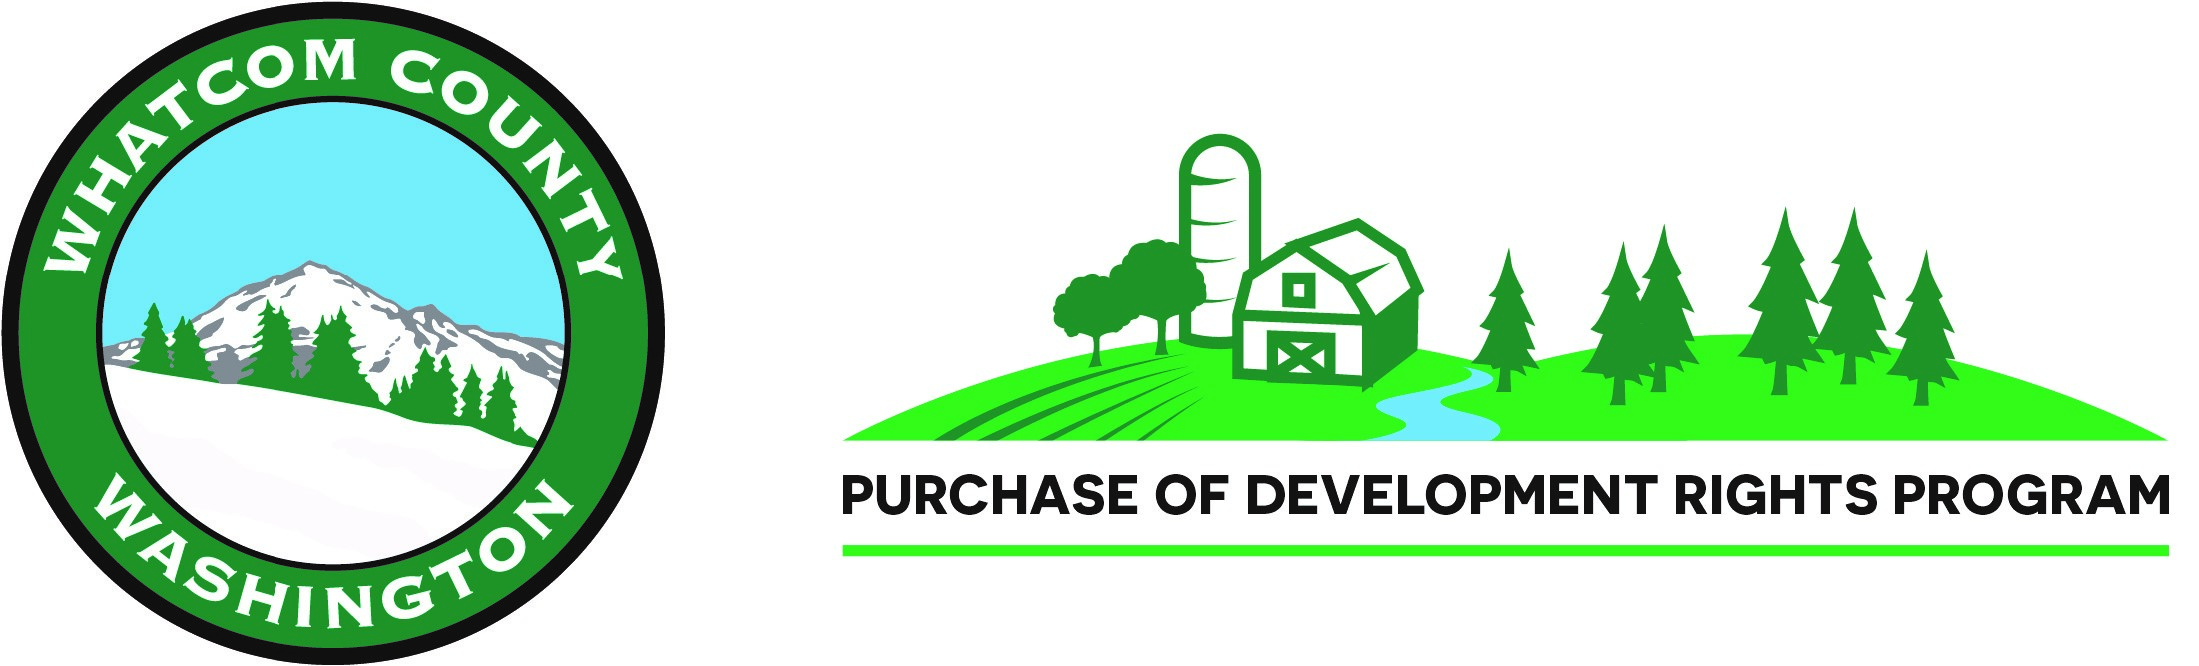 Whatcom County Logo - Overview of Whatcom County Purchase of Development Rights Program ...